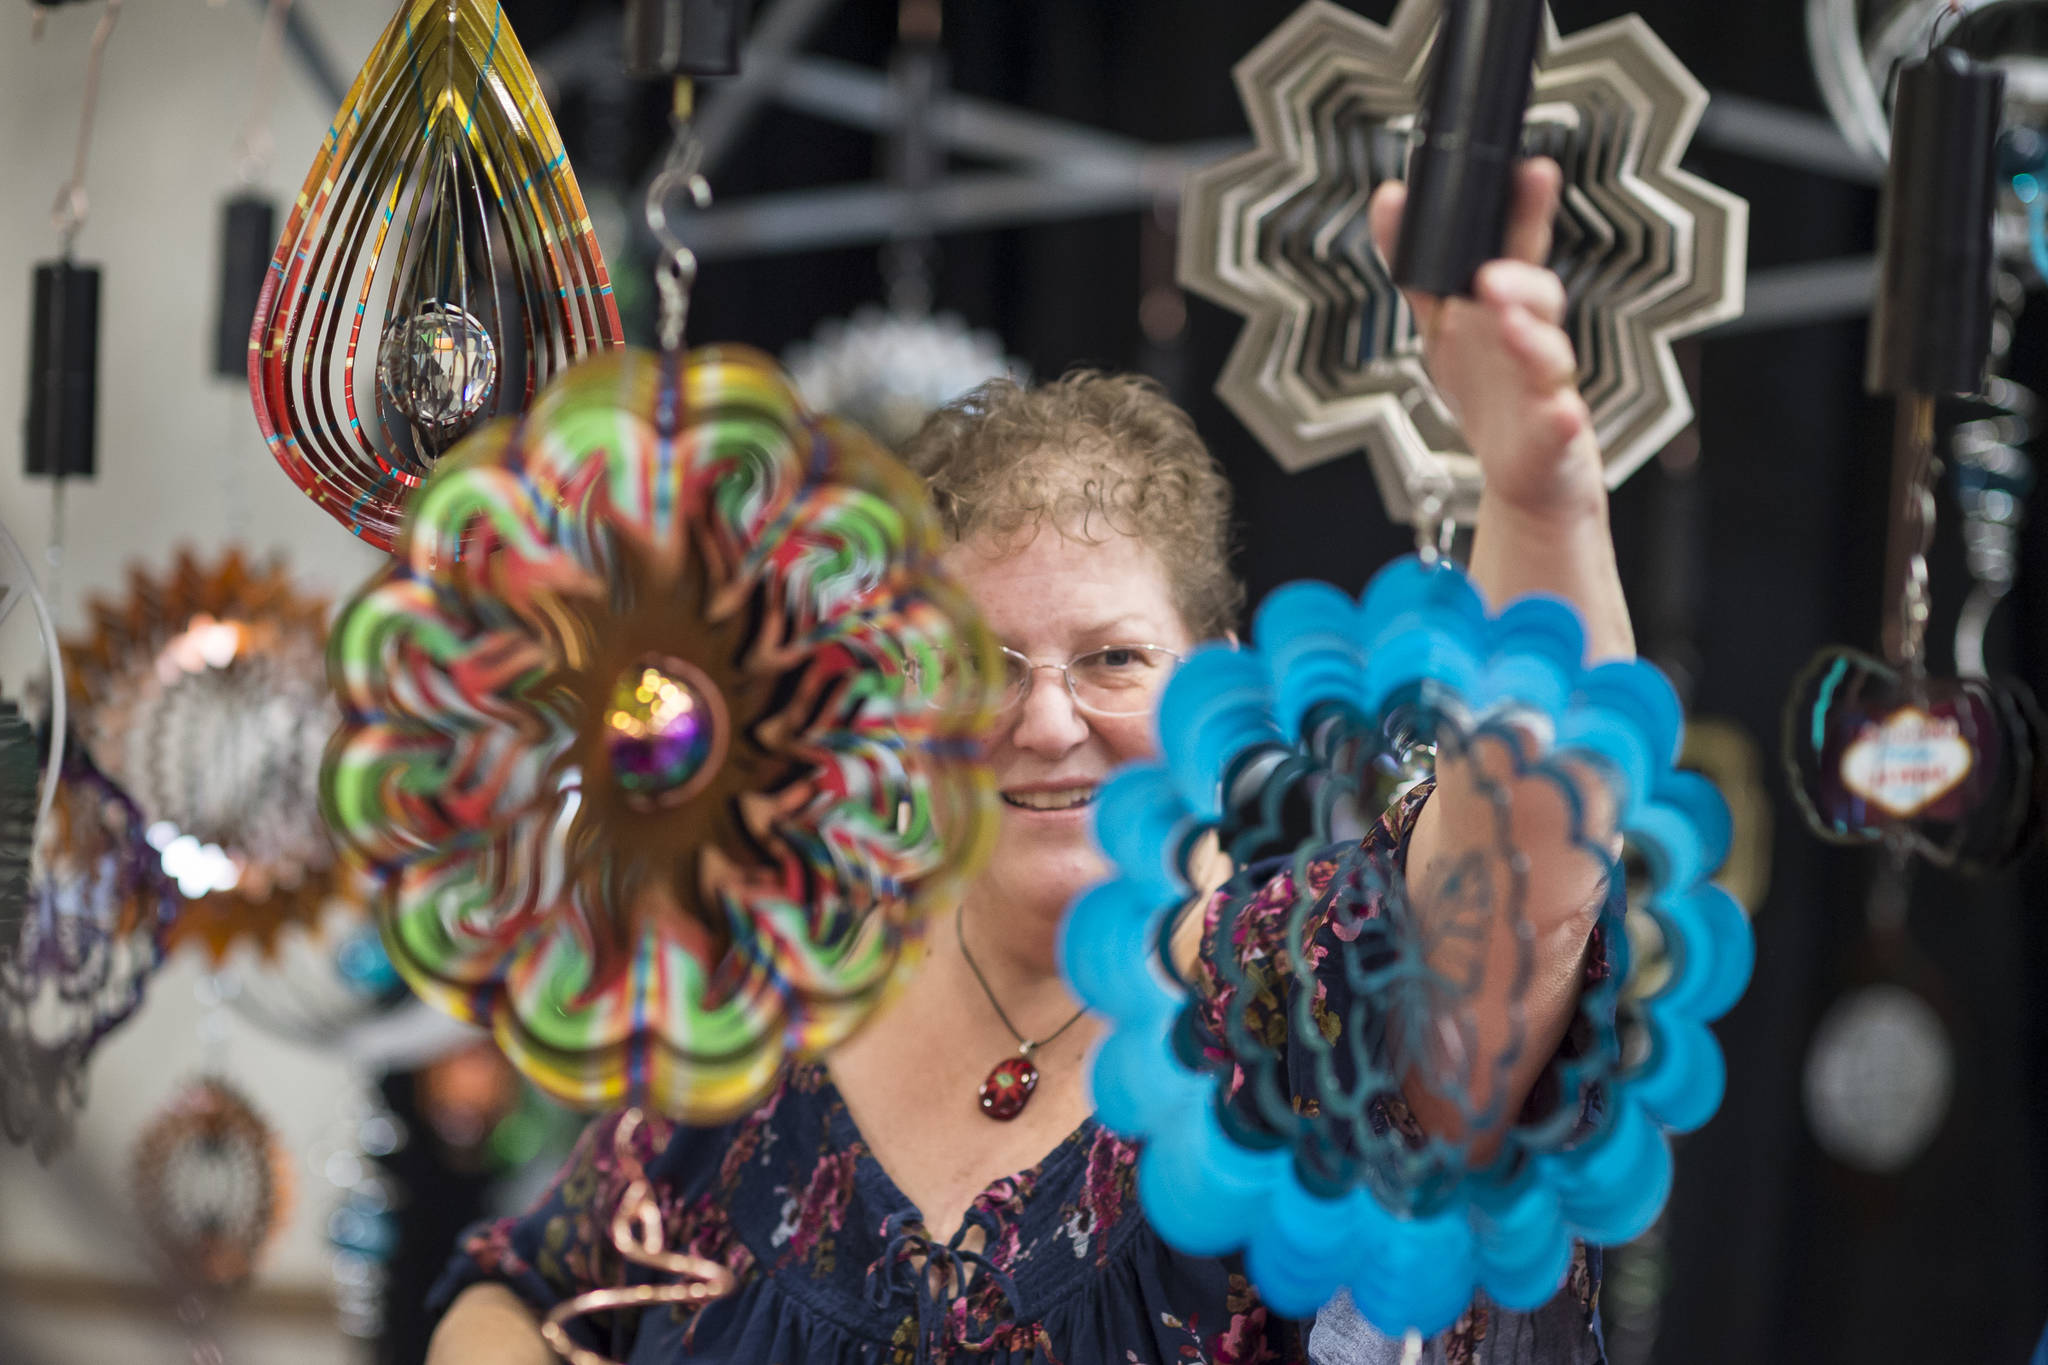 Marla Olsen hangs one of her wind spinners at the display booth she shares with her sister, Ruth, at the Public Market in the Elizabeth Peratrovich Hall on Friday, Nov. 23, 2018. (Michael Penn | Juneau Empire)